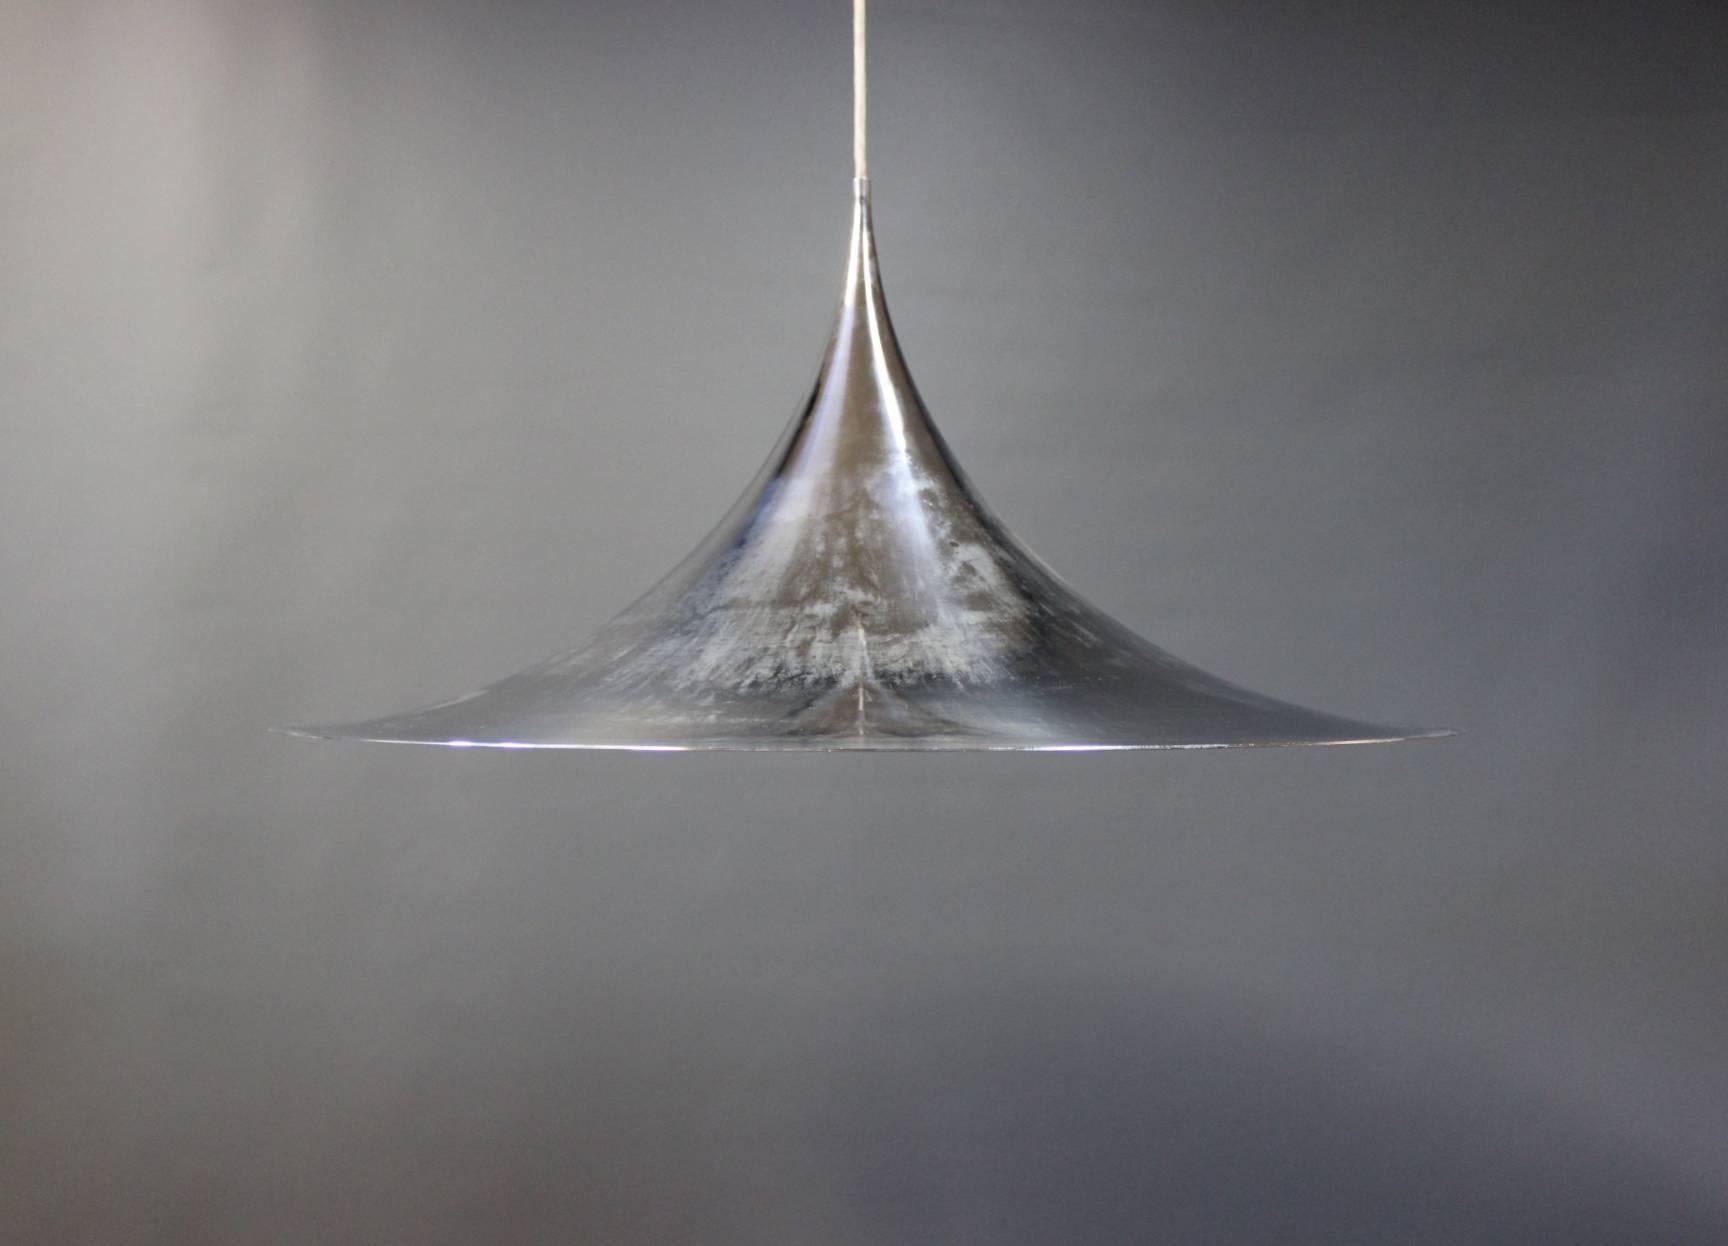 Large Gubi Semi pendant designed by Claus Bonderup and Torsten Thorup in 1955. The pendant is in the color chrome, made of the aluminum and appear patinated. This particular pendant is from the 1960s.